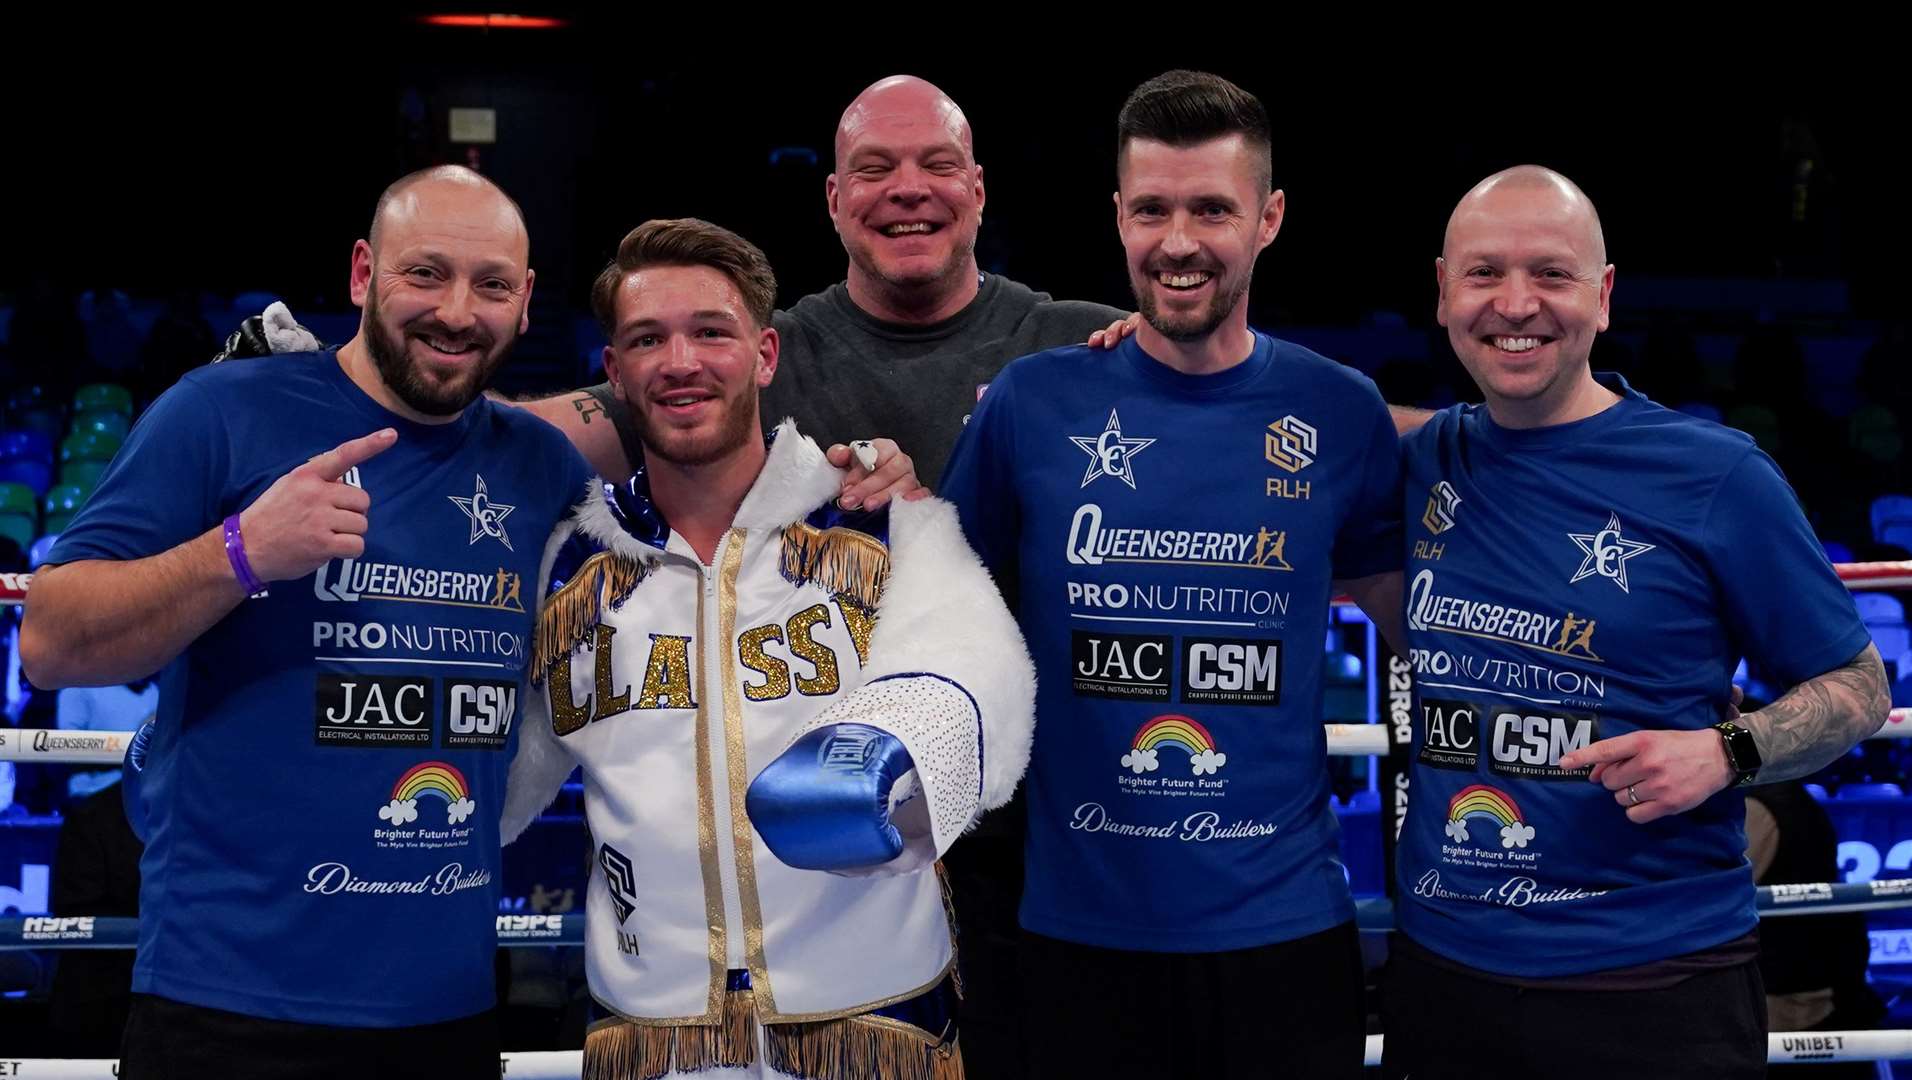 From left, Steve Hickford (coach), Charlie Hickford, Jason Fielding (cutsman), Dan Woledge Snr (coach) and Paul O'Neill (nutritionist) after Hickford’s win over Yin Caicedo. Picture: Stephen Dunkley / Queensberry Promotions